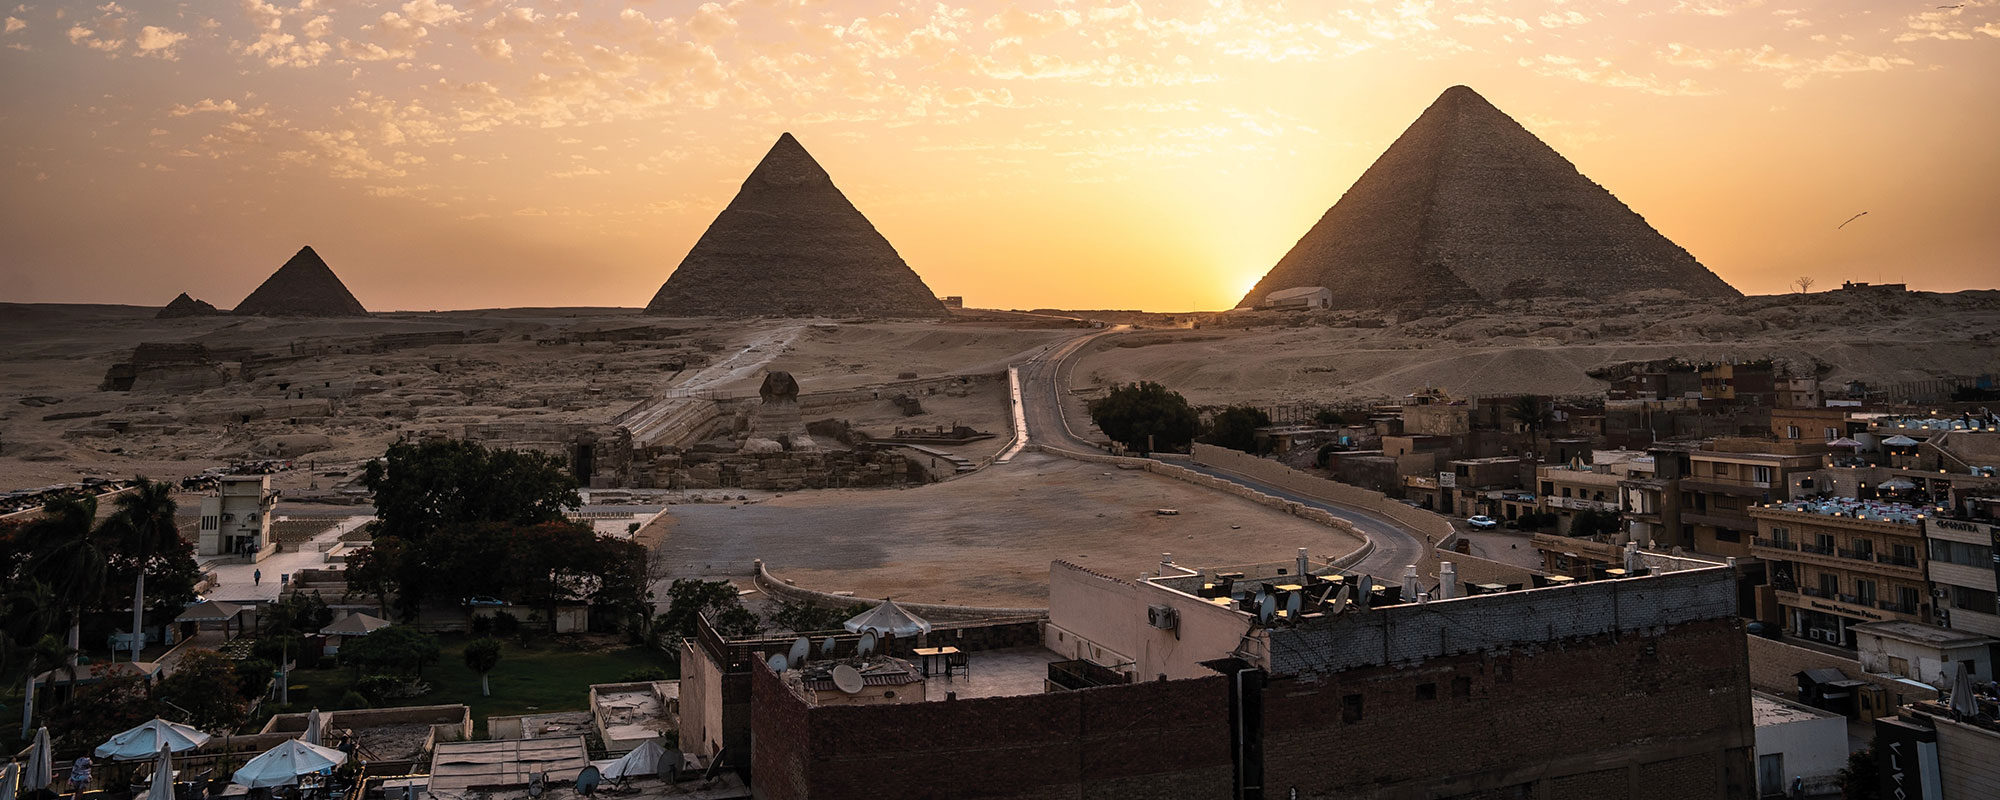 A view of the pyramids from the rooftop of a building in Giza.